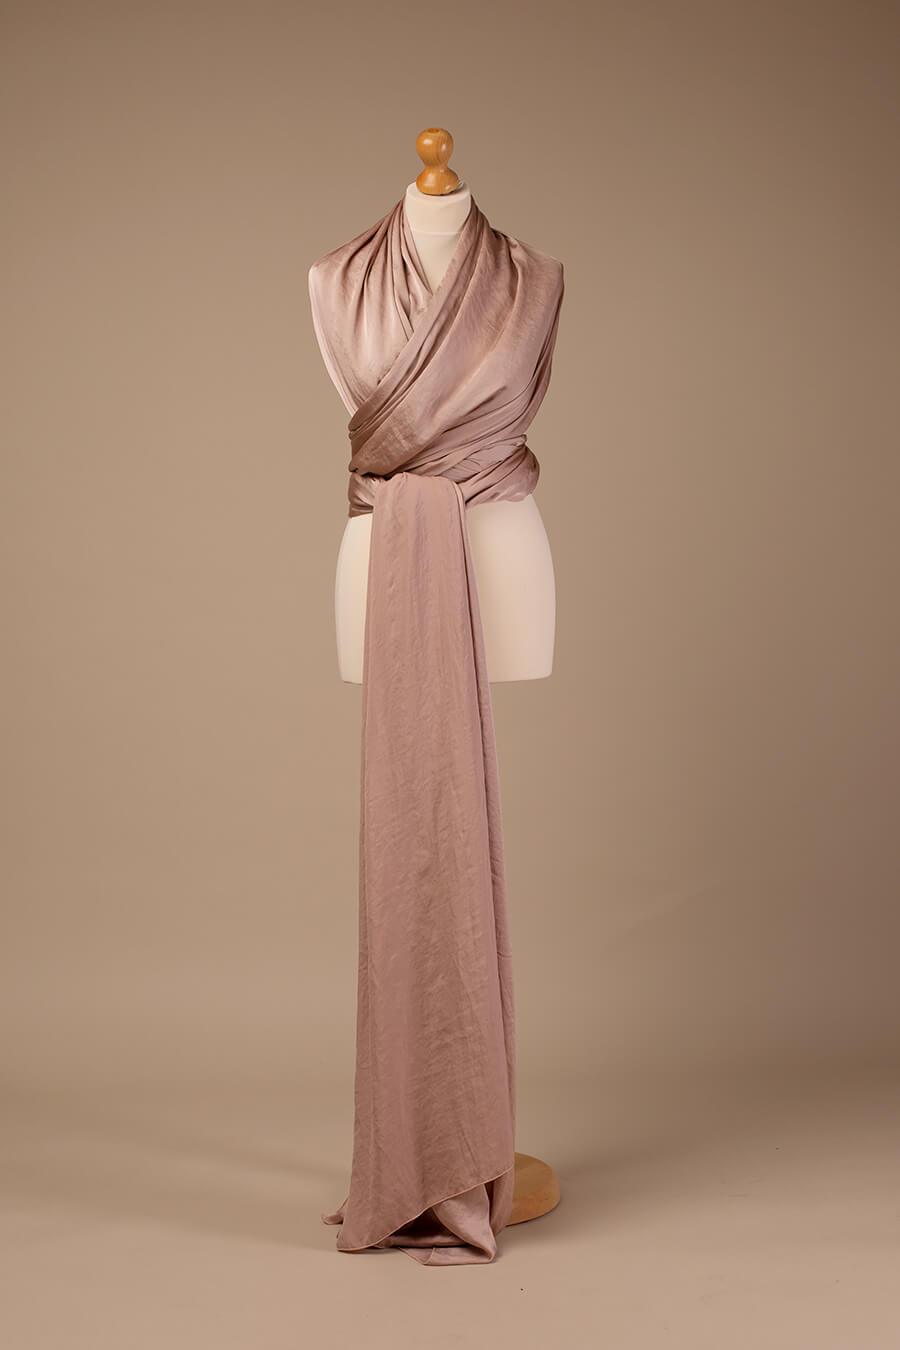 Display photo of a 4m long silky scarf in dusty pink color. 